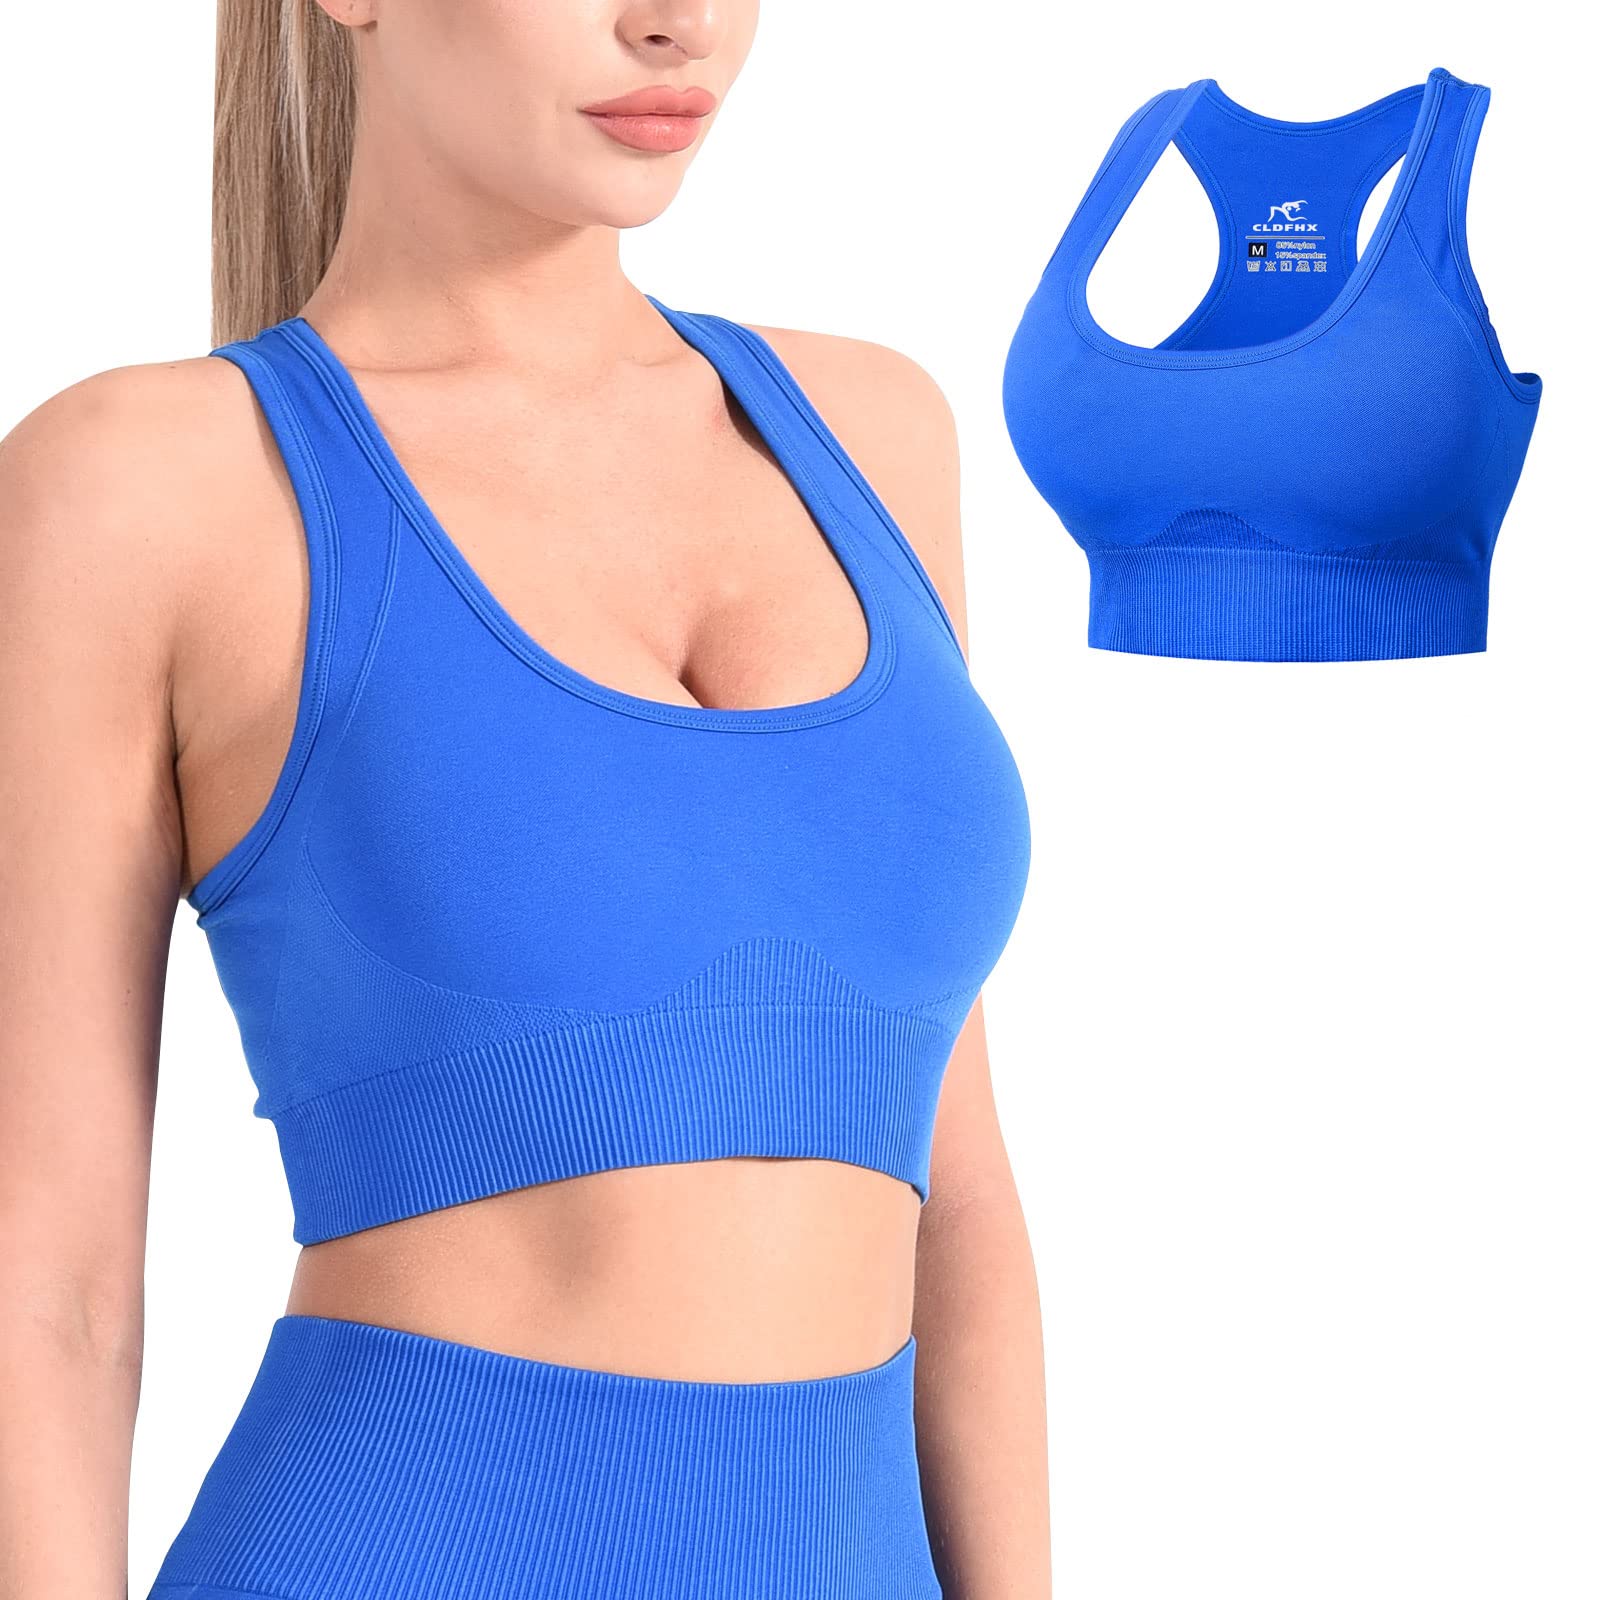 CLDFHX Women Sports Bra High/Mid Impact Support Comfy Seamless Racerback  Sports Bras Padded